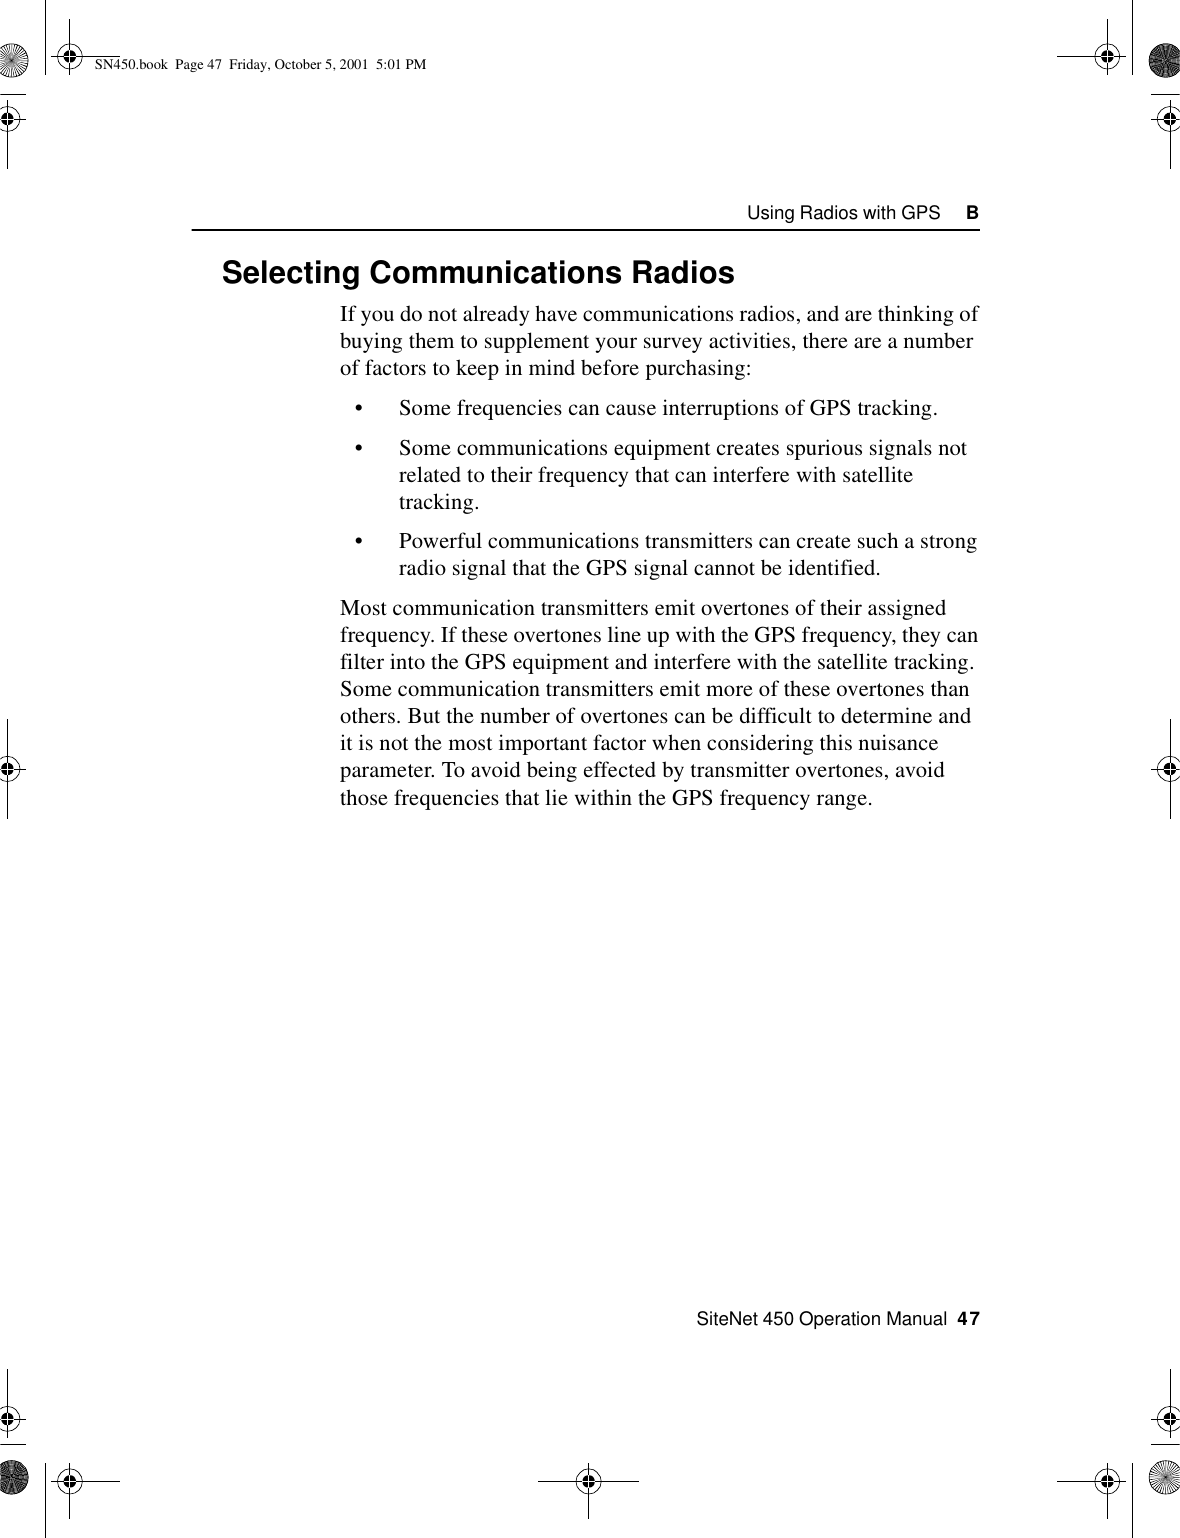    SiteNet 450 Operation Manual  47Using Radios with GPS     BB.2 Selecting Communications RadiosIf you do not already have communications radios, and are thinking of buying them to supplement your survey activities, there are a number of factors to keep in mind before purchasing: •Some frequencies can cause interruptions of GPS tracking.•Some communications equipment creates spurious signals not related to their frequency that can interfere with satellite tracking.•Powerful communications transmitters can create such a strong radio signal that the GPS signal cannot be identified. Most communication transmitters emit overtones of their assigned frequency. If these overtones line up with the GPS frequency, they can filter into the GPS equipment and interfere with the satellite tracking. Some communication transmitters emit more of these overtones than others. But the number of overtones can be difficult to determine and it is not the most important factor when considering this nuisance parameter. To avoid being effected by transmitter overtones, avoid those frequencies that lie within the GPS frequency range.SN450.book  Page 47  Friday, October 5, 2001  5:01 PM